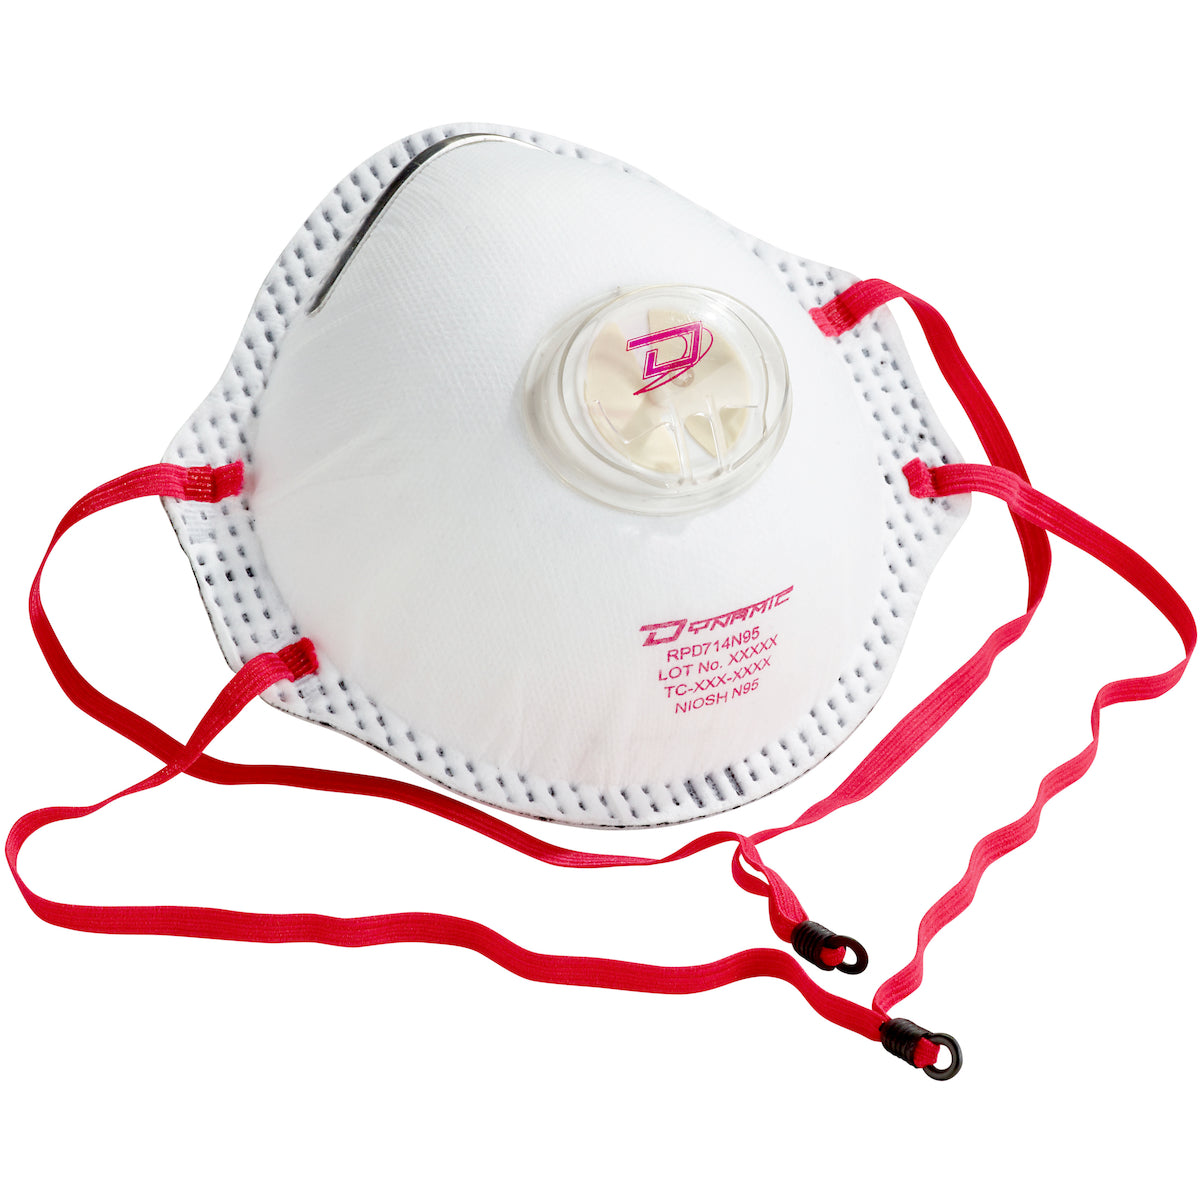 Dynamic 270-RPD714N95 Deluxe N95 Disposable Respirator with Valve - 10 Pack